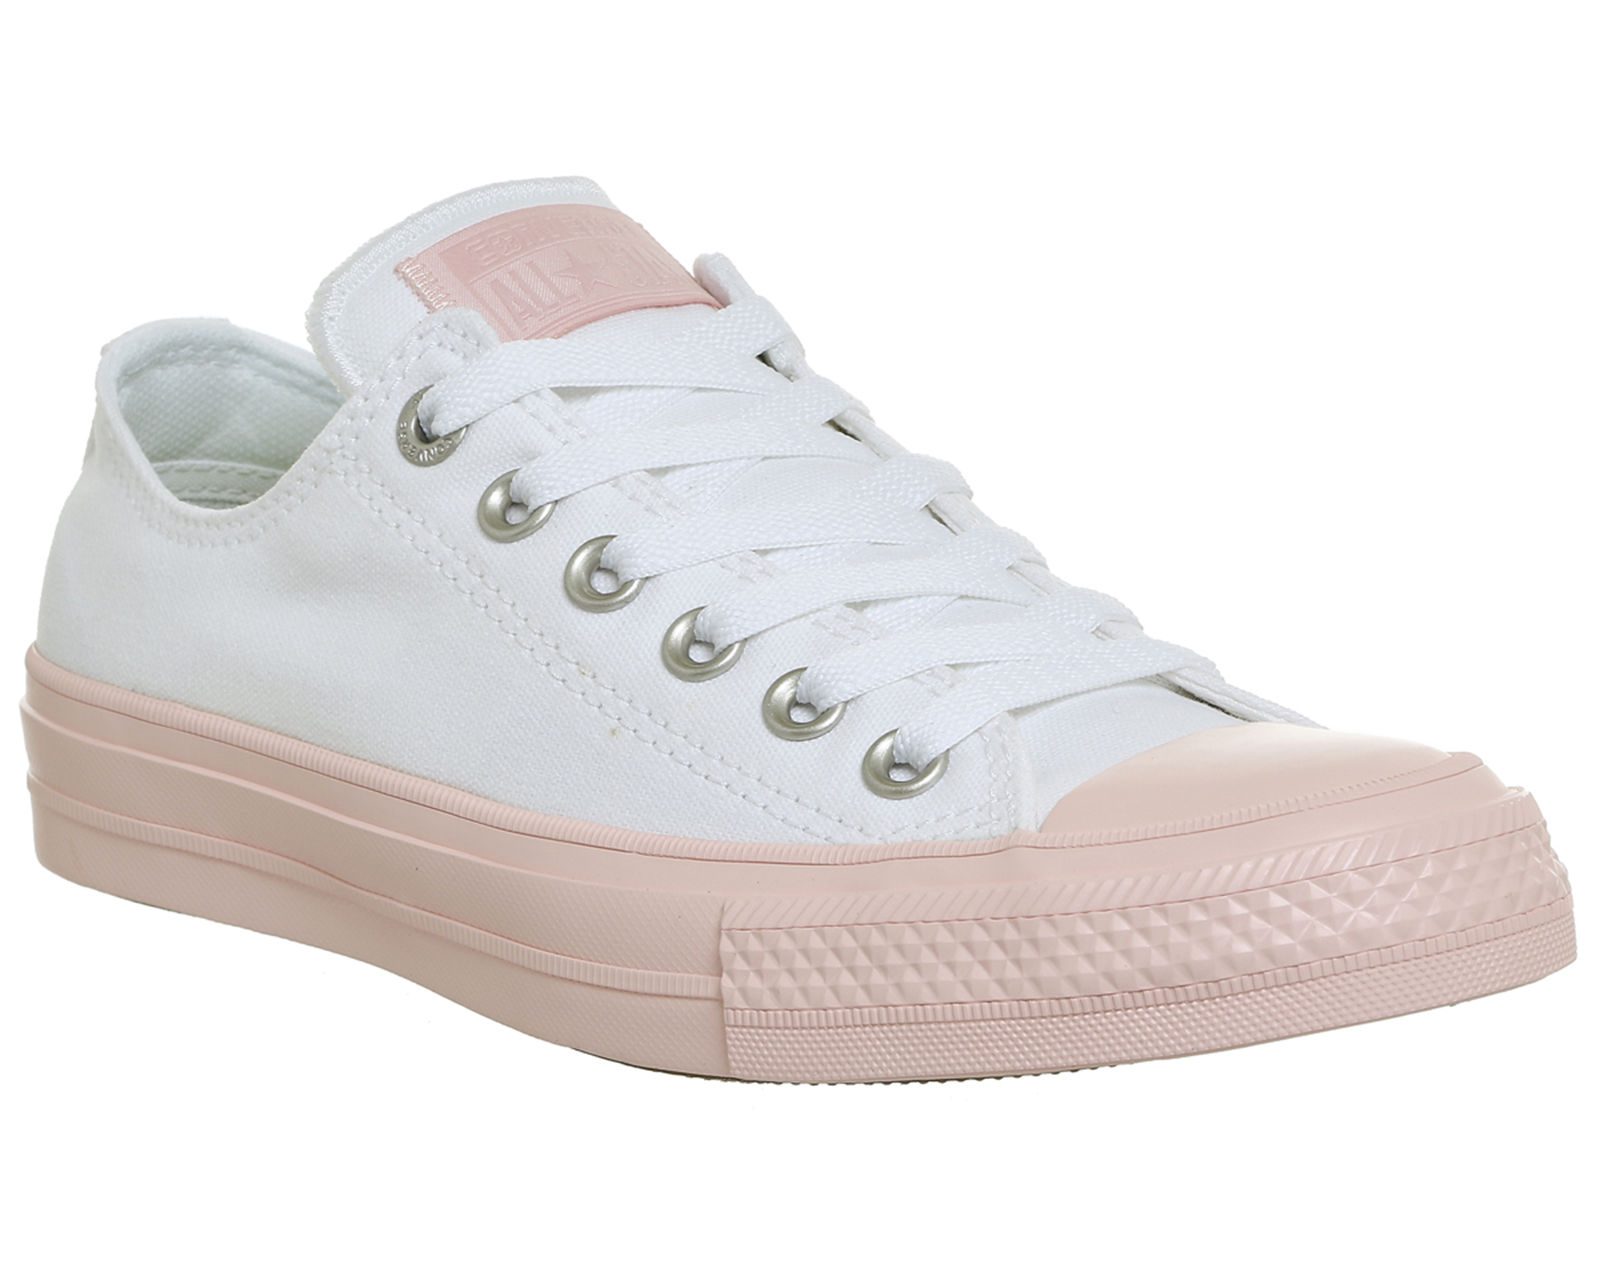 Converse Chuck Ii Ox White Vapour Pink - Hers trainers